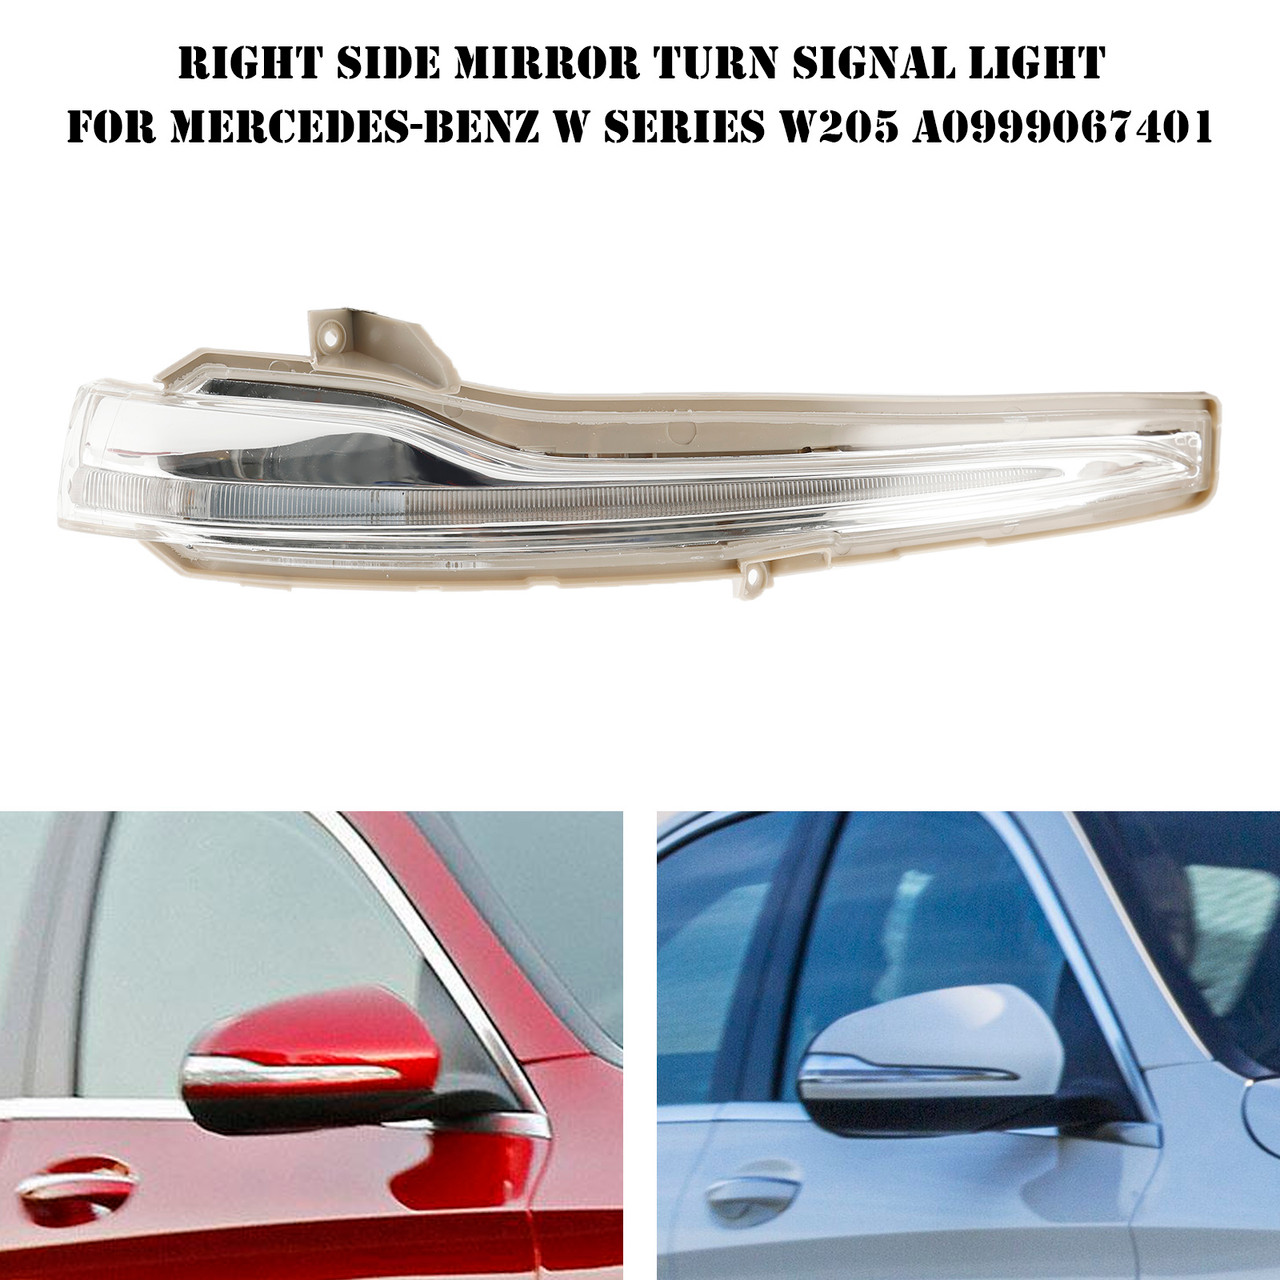 Right Side Mirror Turn Signal Light For Mercedes-Benz W Series W205 A0999067401